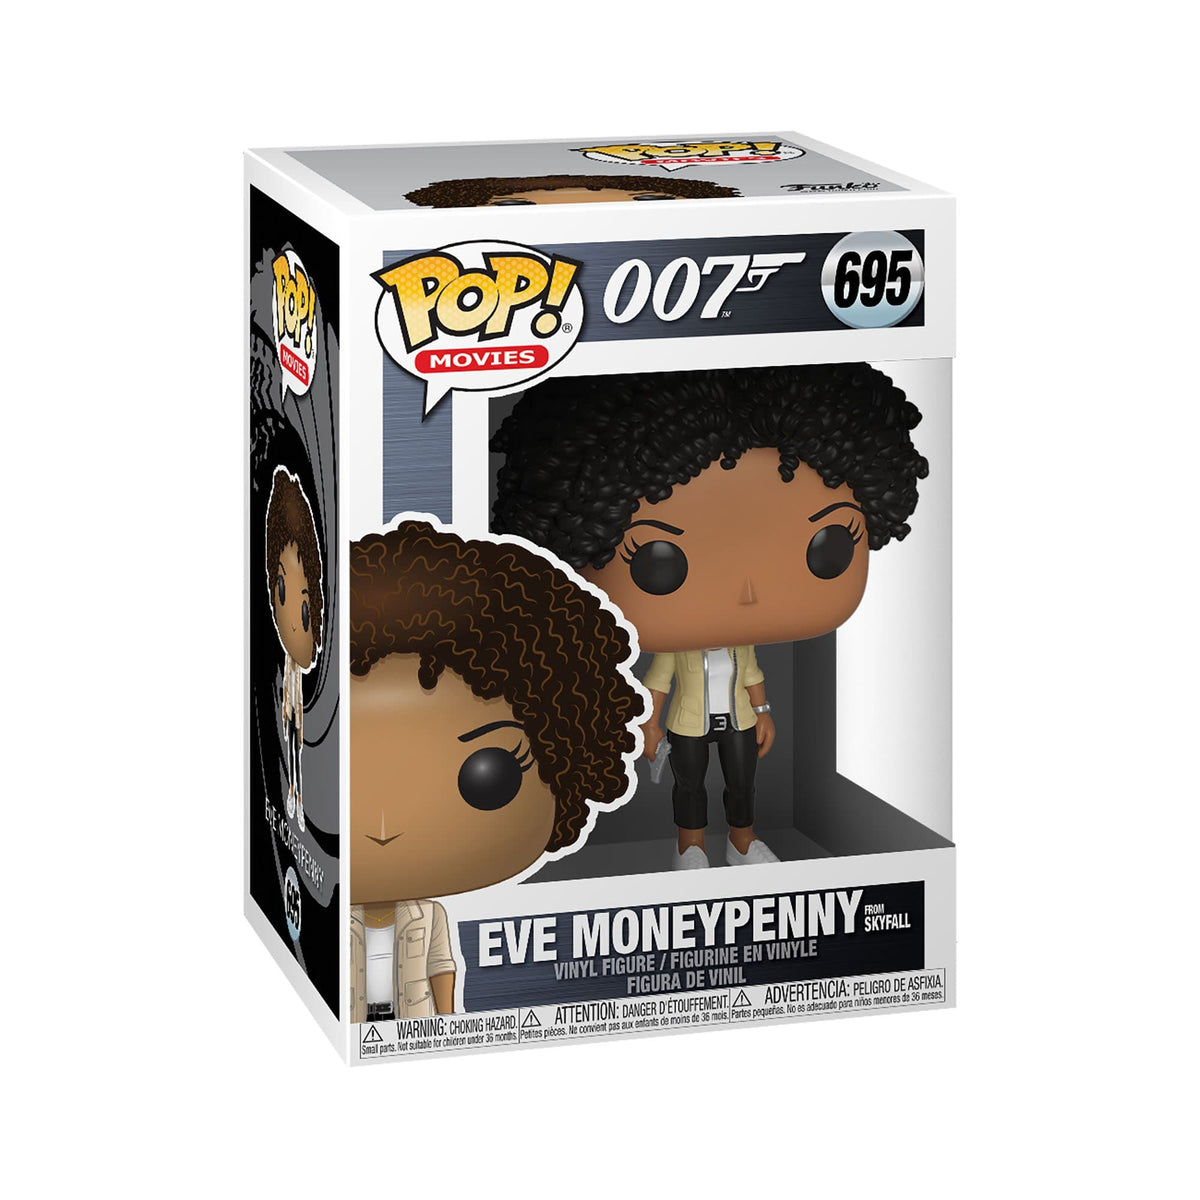 Moneypenny Pop! Figure - Skyfall Edition - By Funko - 007STORE